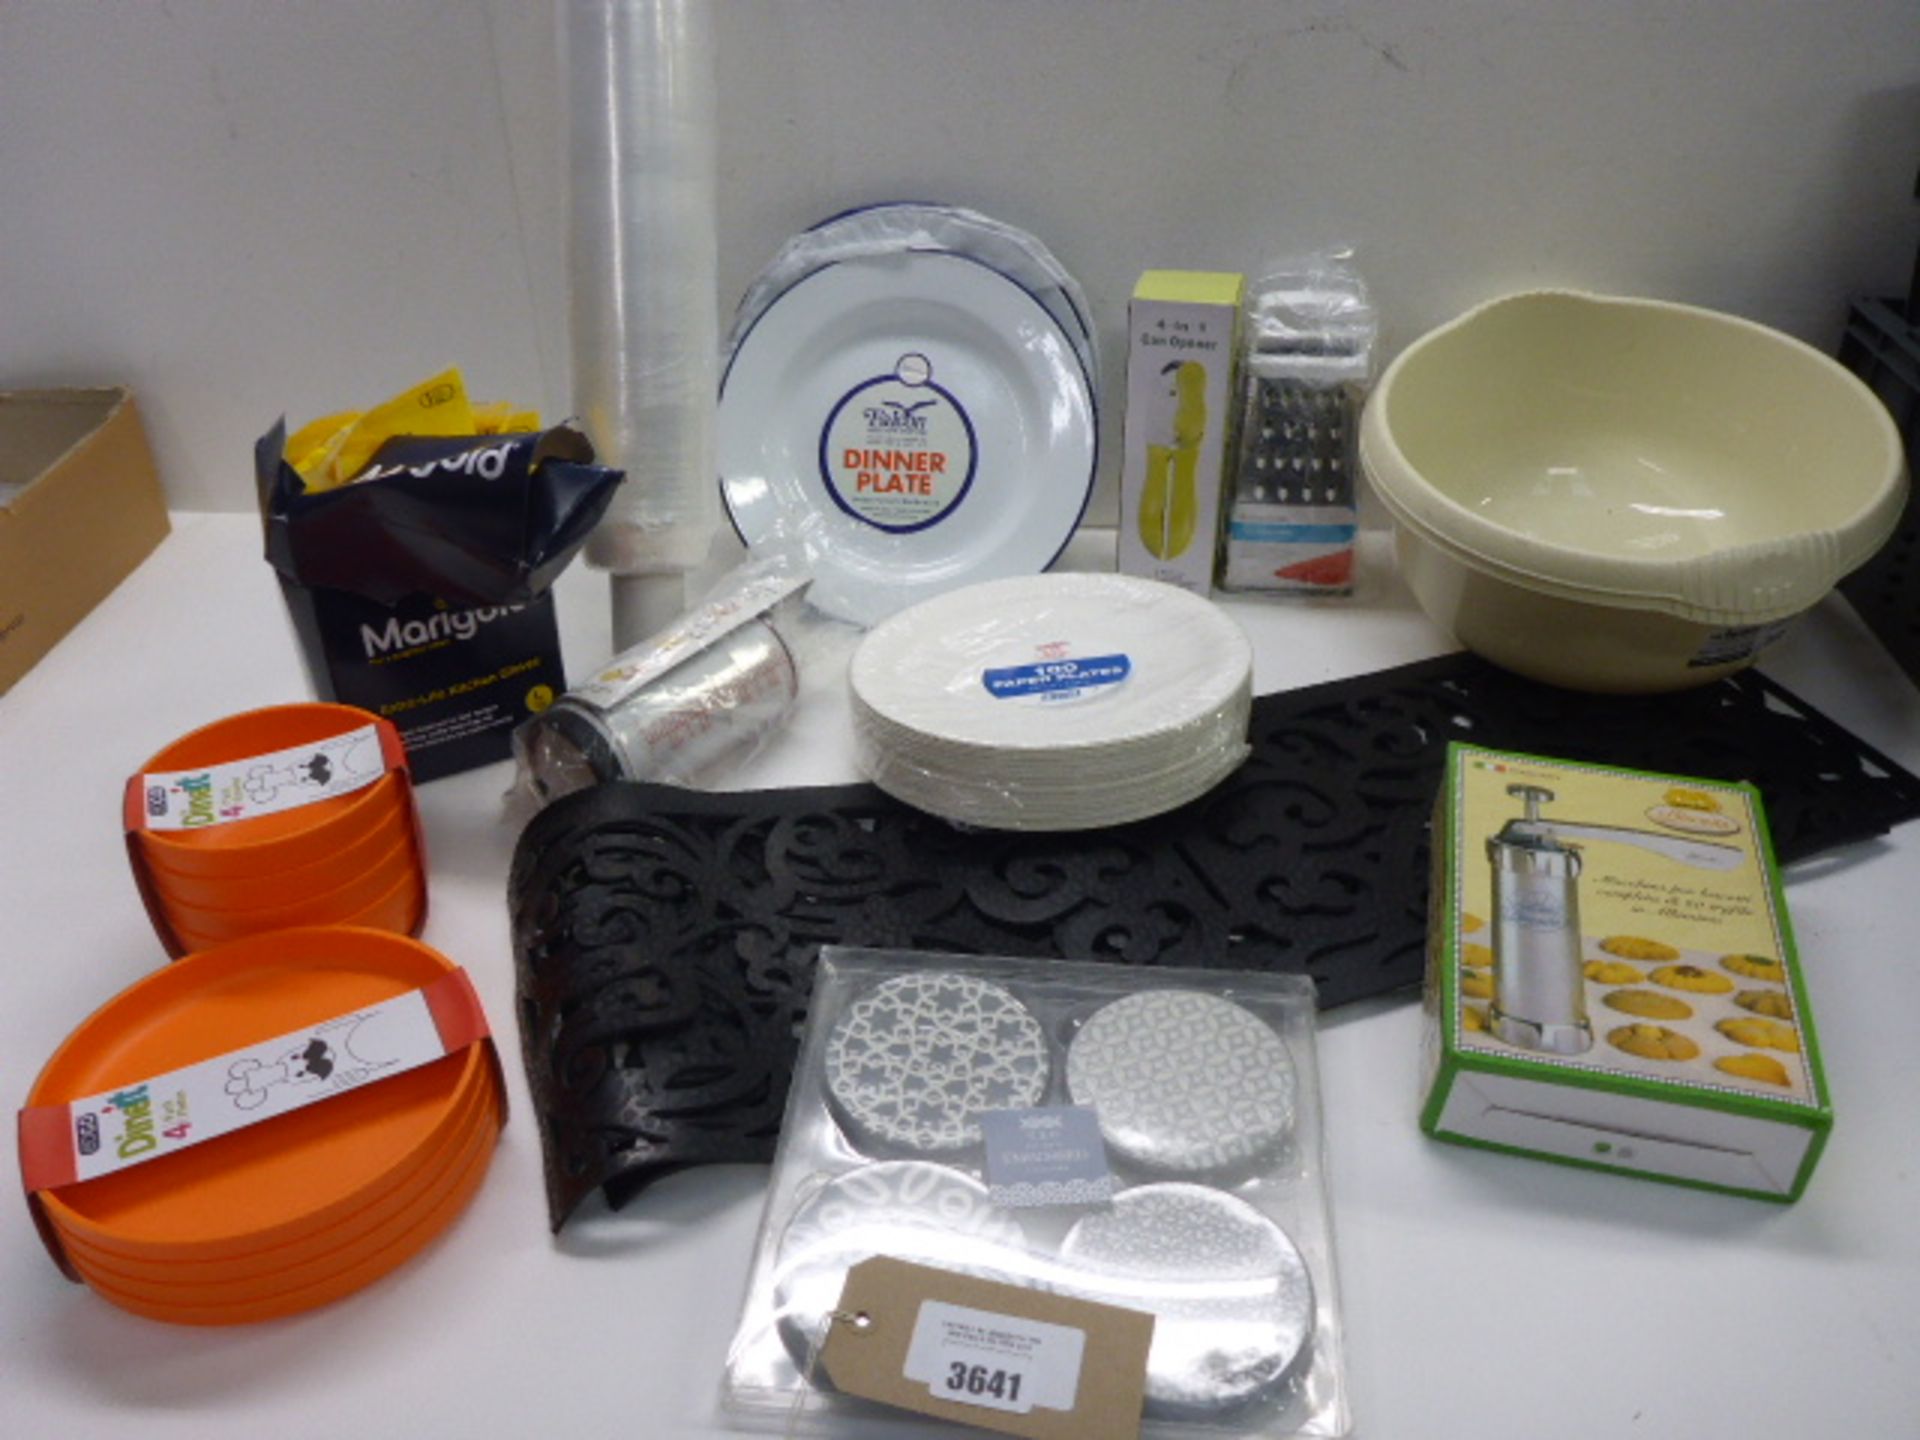 Non slip matting, cling film, metal, paper & plastic plates, washing up bowls, biscuit maker, can